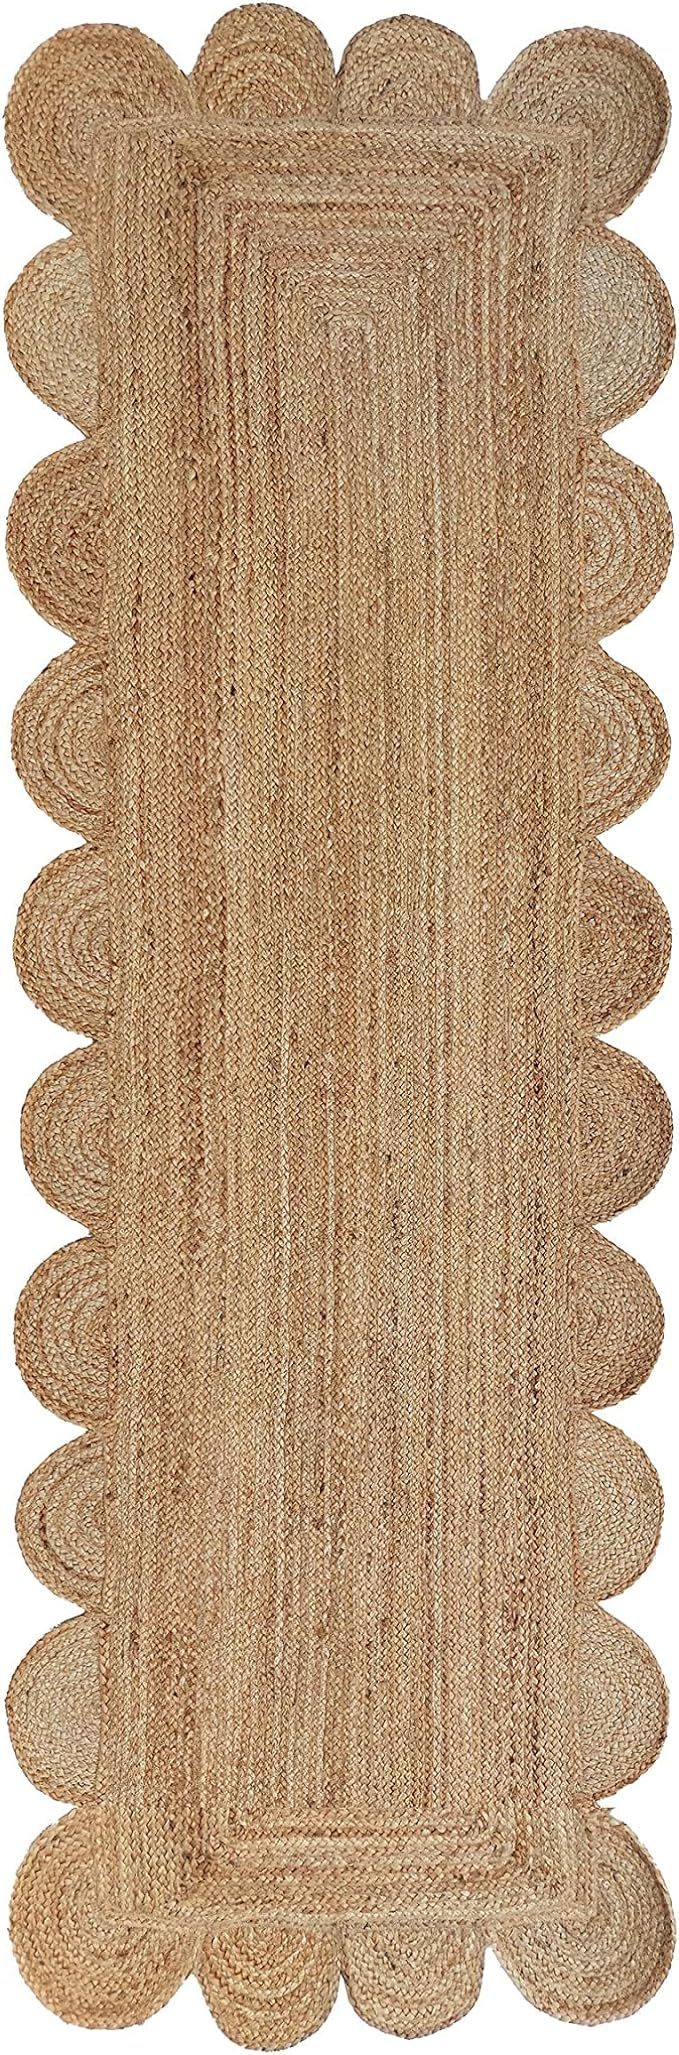 Scalloped Natural Jute Area Rug, Natural Color (2'X6') | Amazon (US)